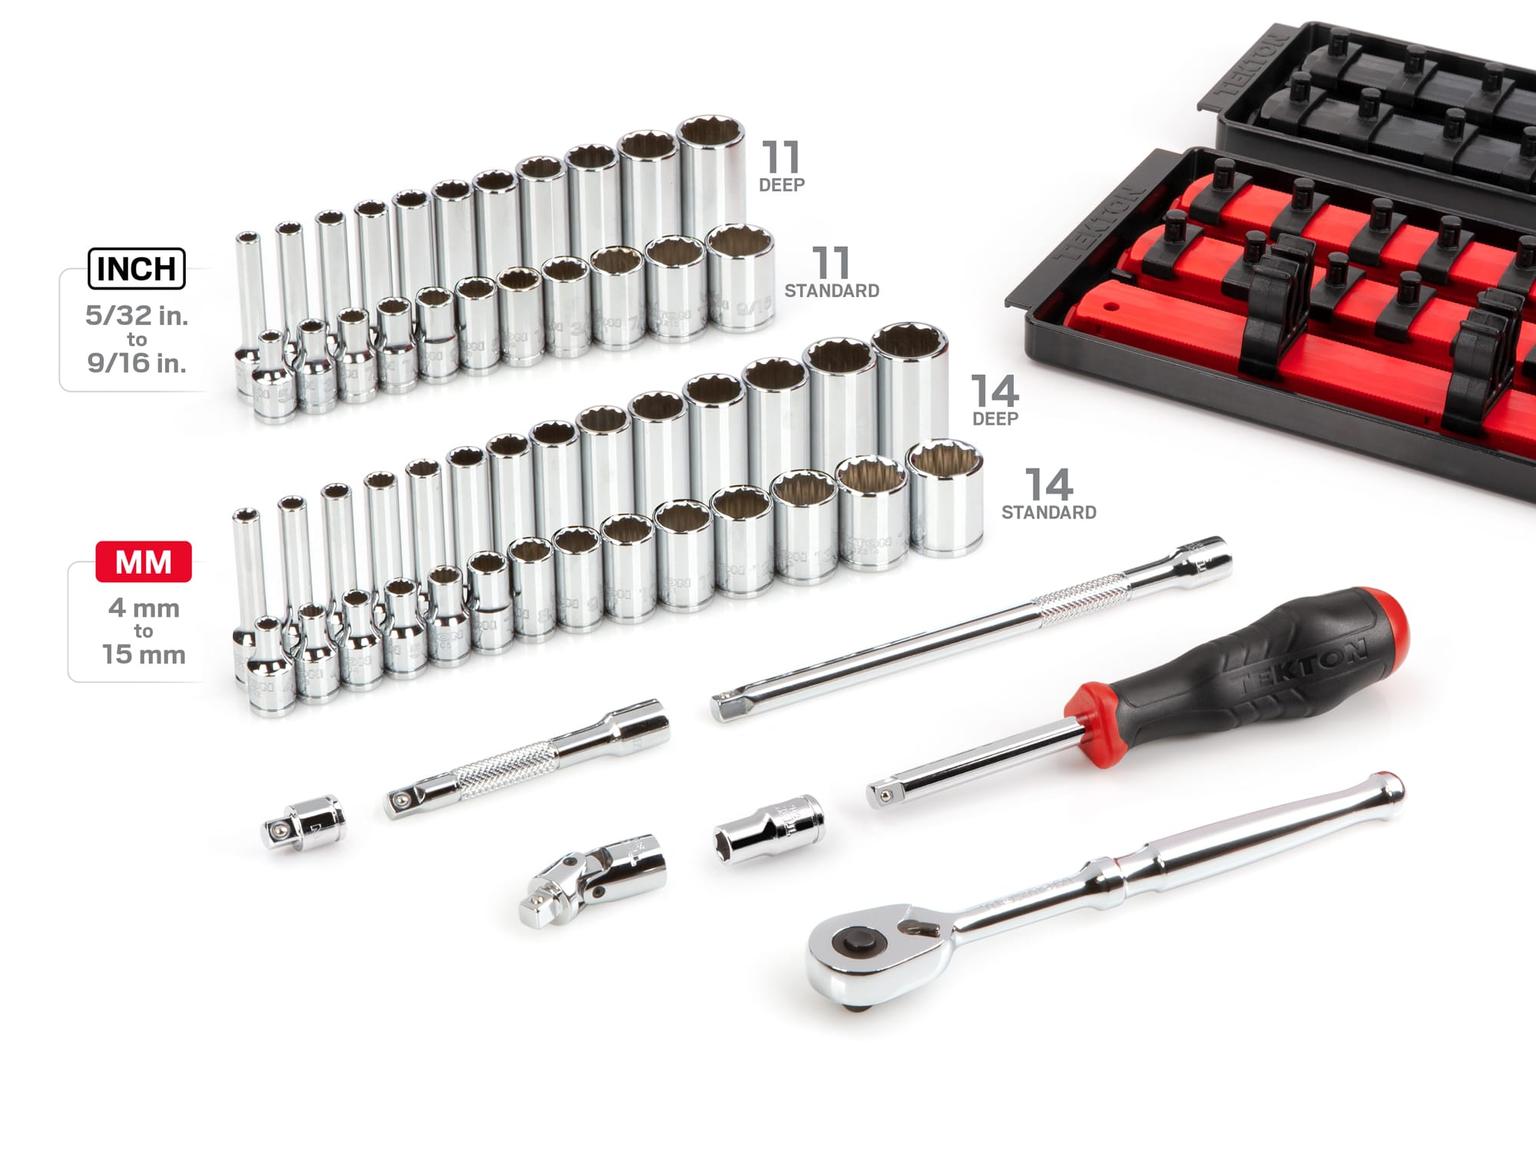 TEKTON SKT03302-T 1/4 Inch Drive 12-Point Socket and Ratchet Set with Rails, 57-Piece (5/32-9/16 in., 4-15 mm)